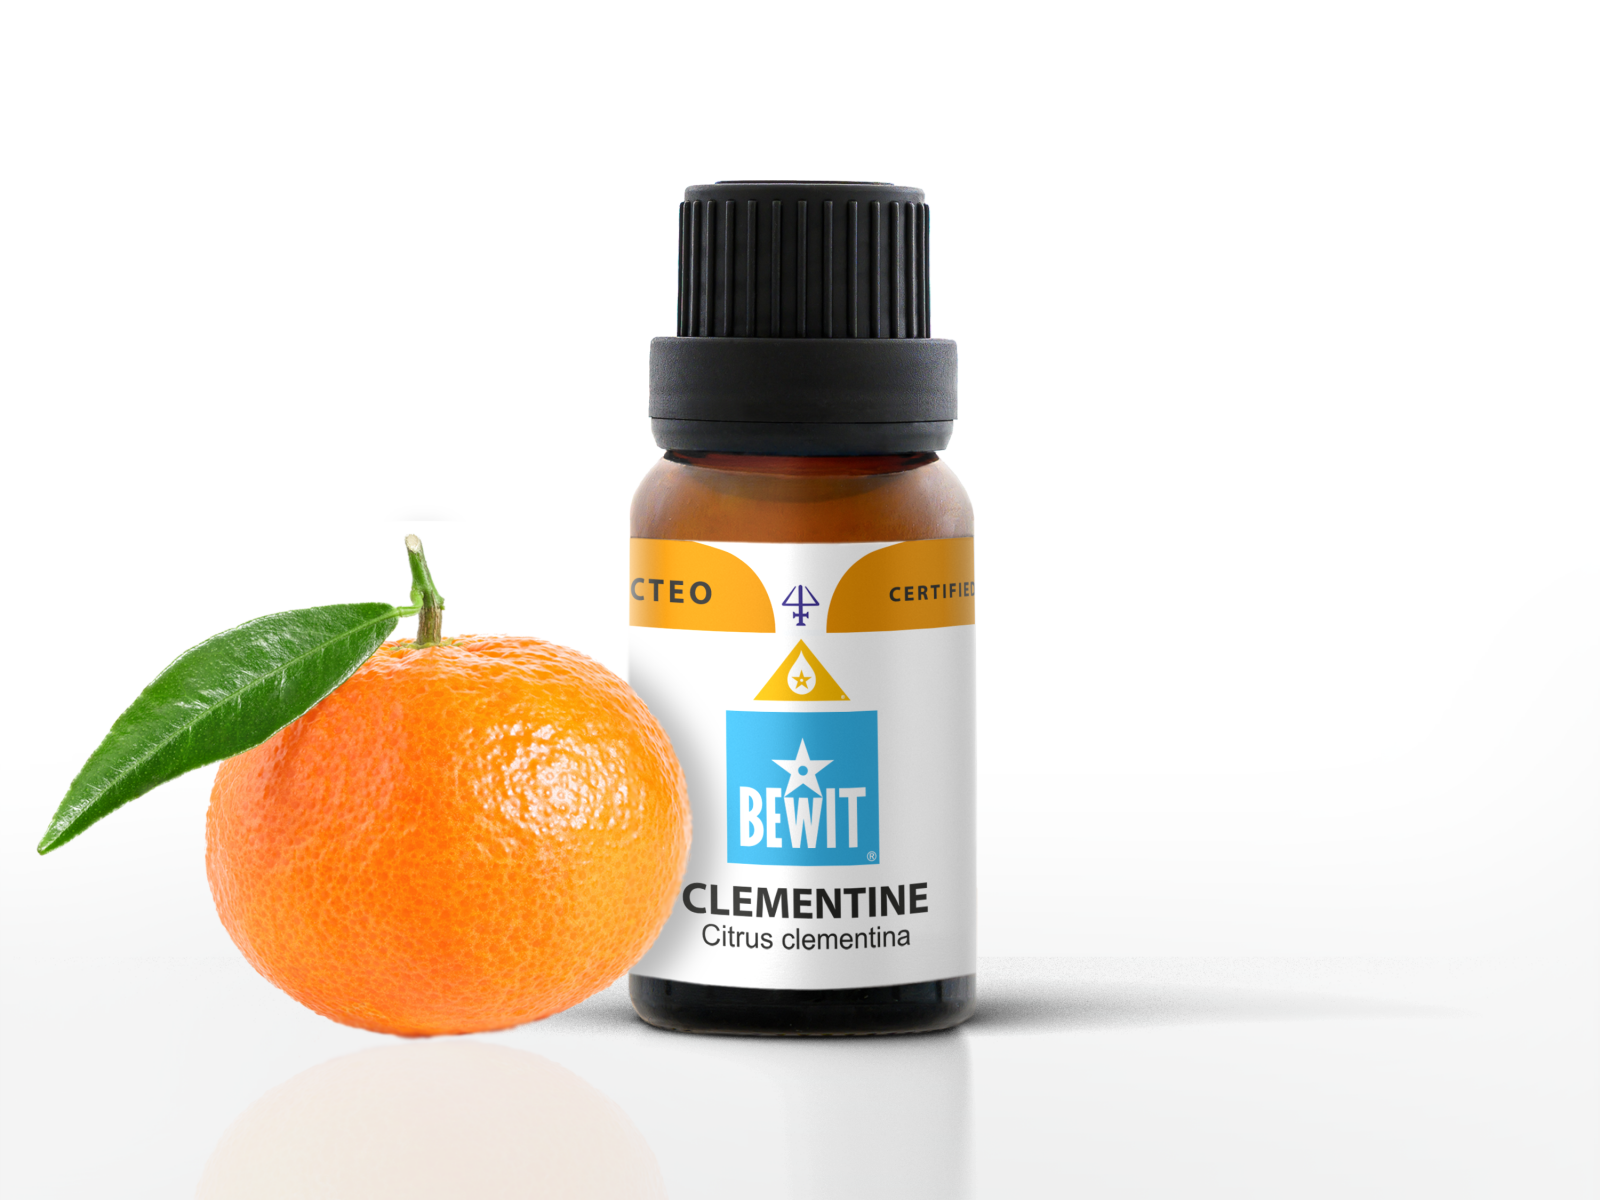 BEWIT Clementine - 100% pure and natural CTEO® essential oil - 1